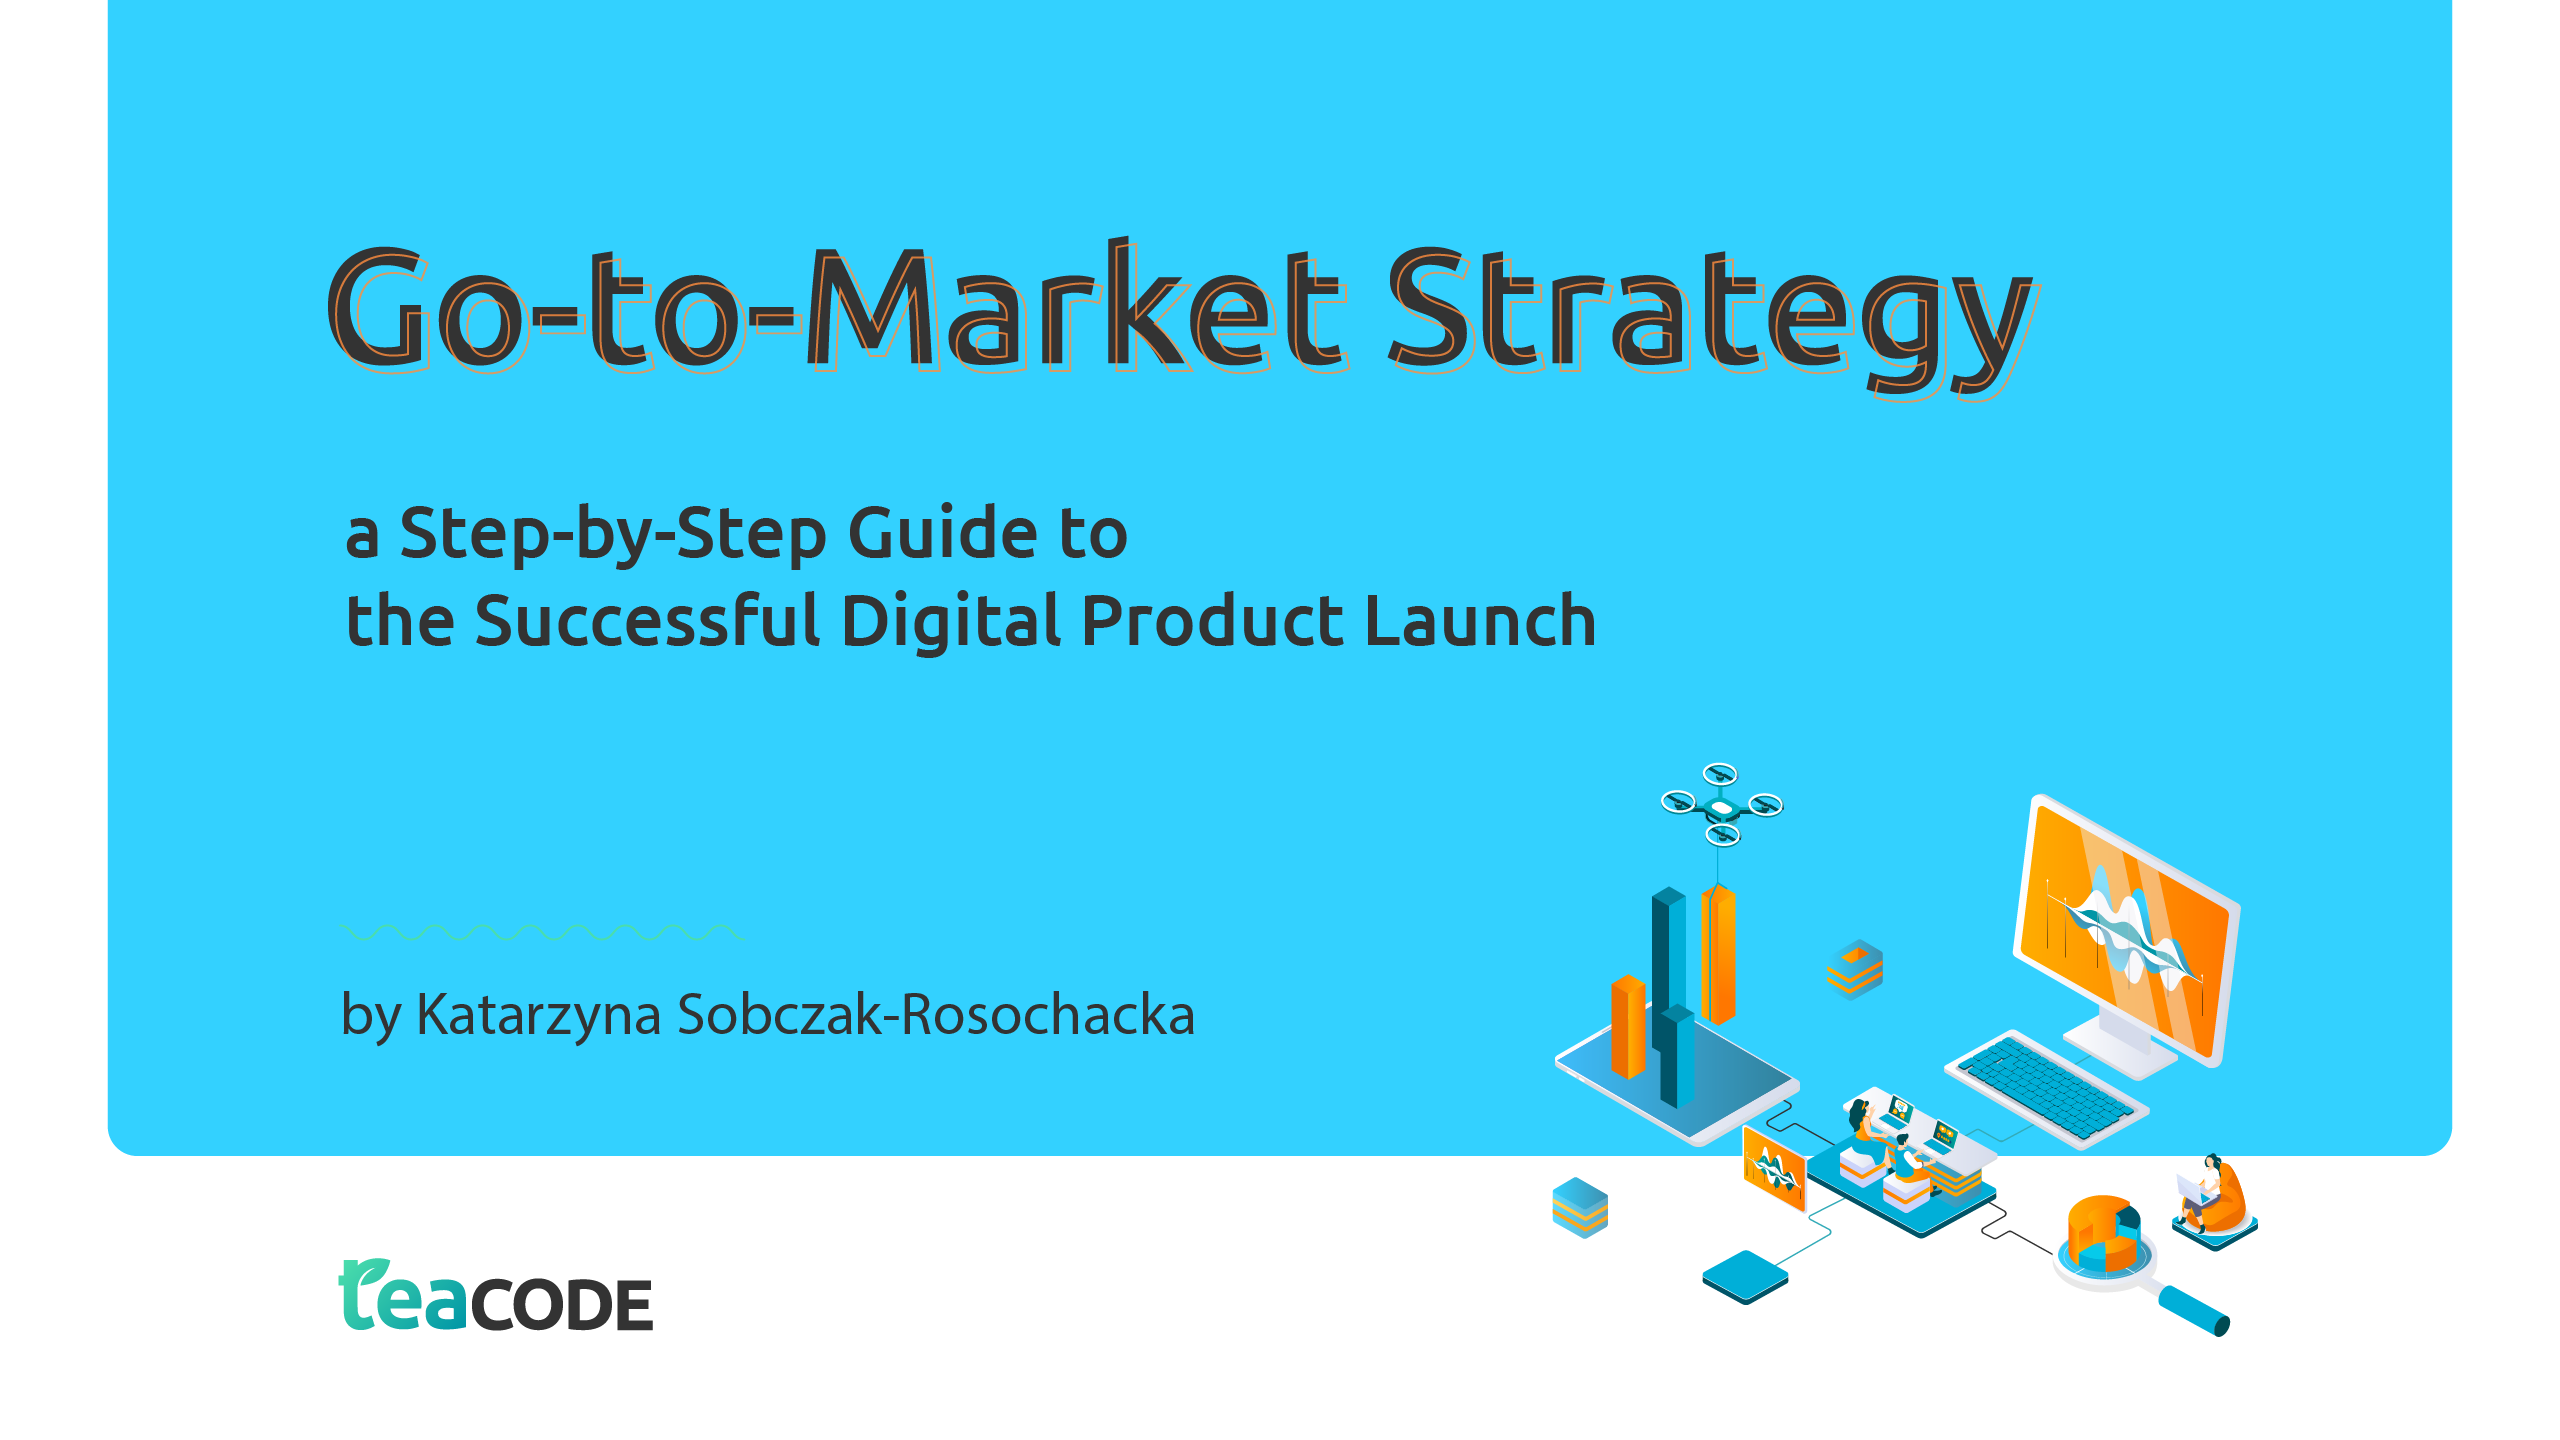 Go-to-Market Strategy – a Step-by-Step Guide to the Successful Digital Product Launch